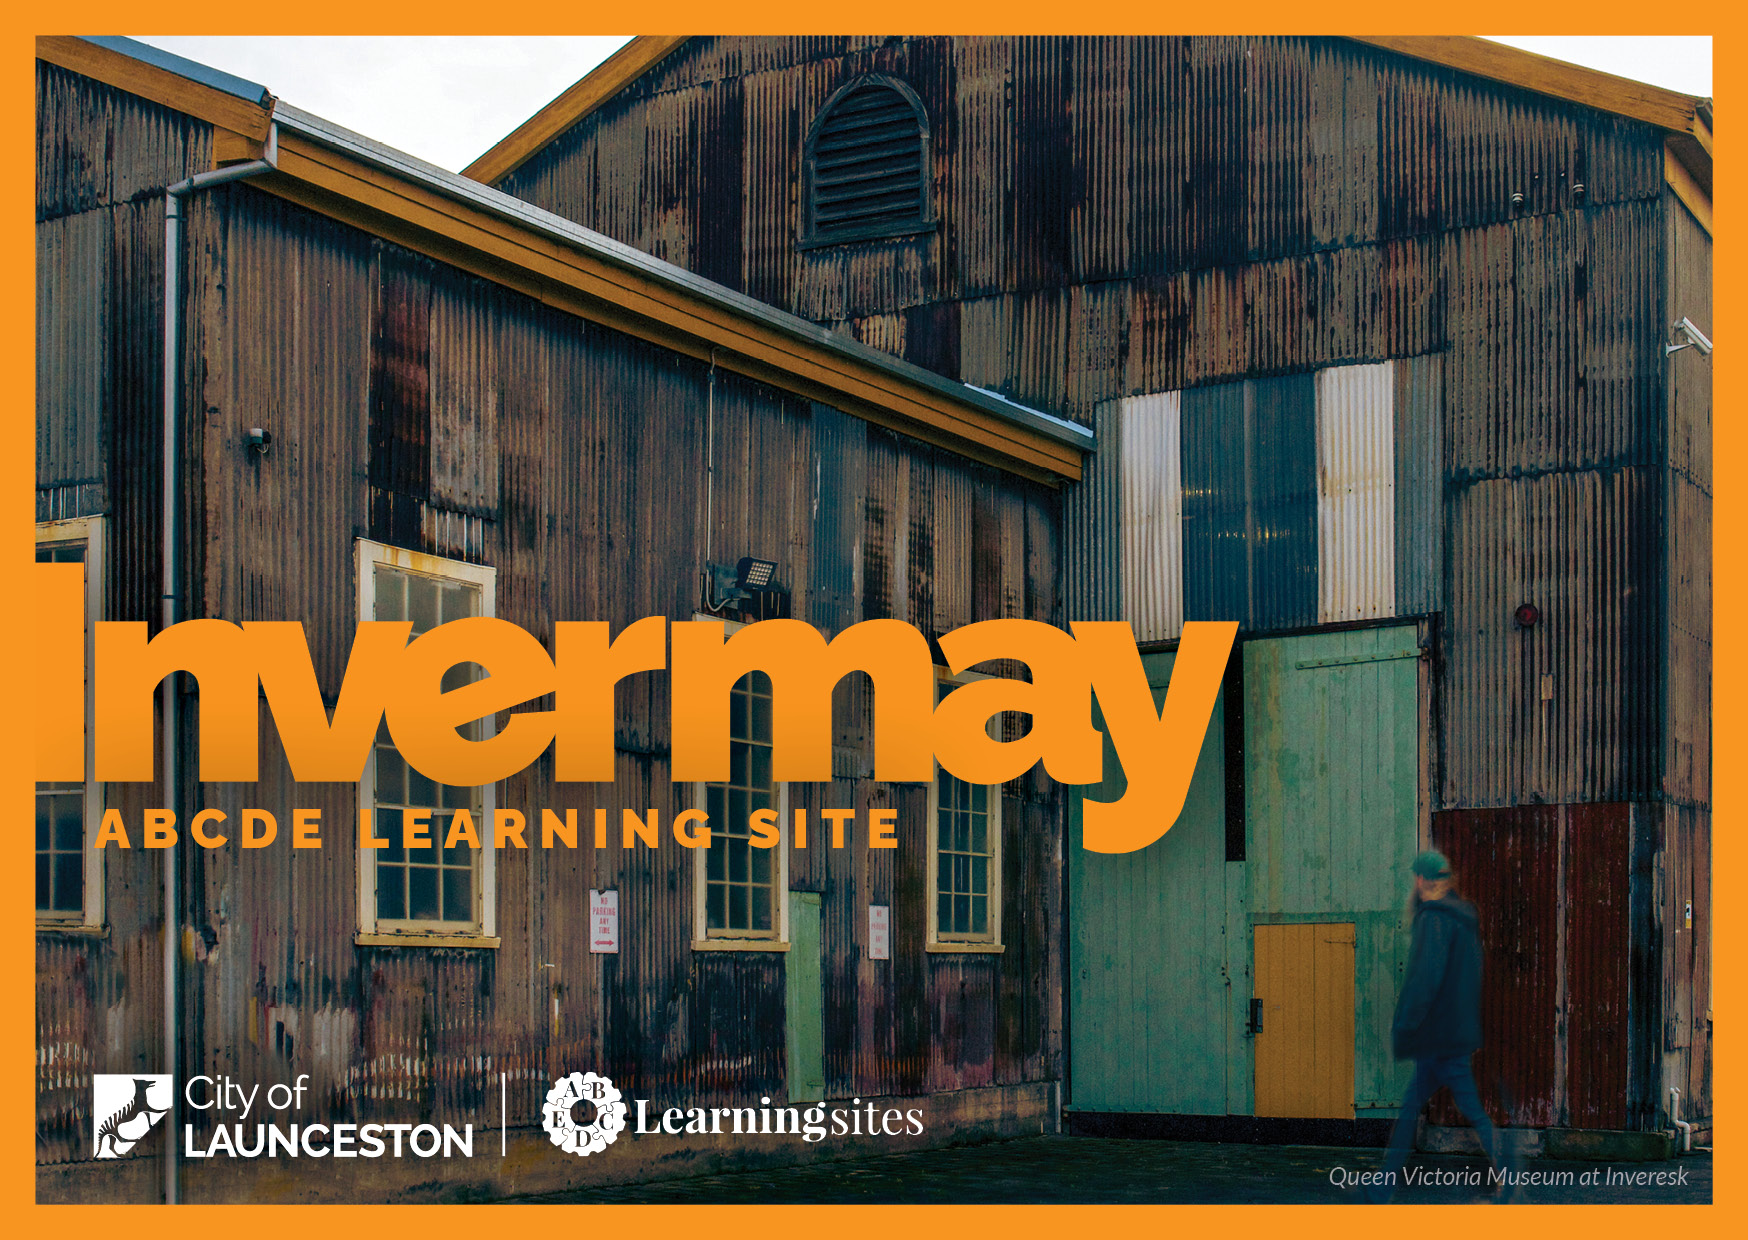 2503 Invermay Learning Site Postcard-7-FrontA.jpg